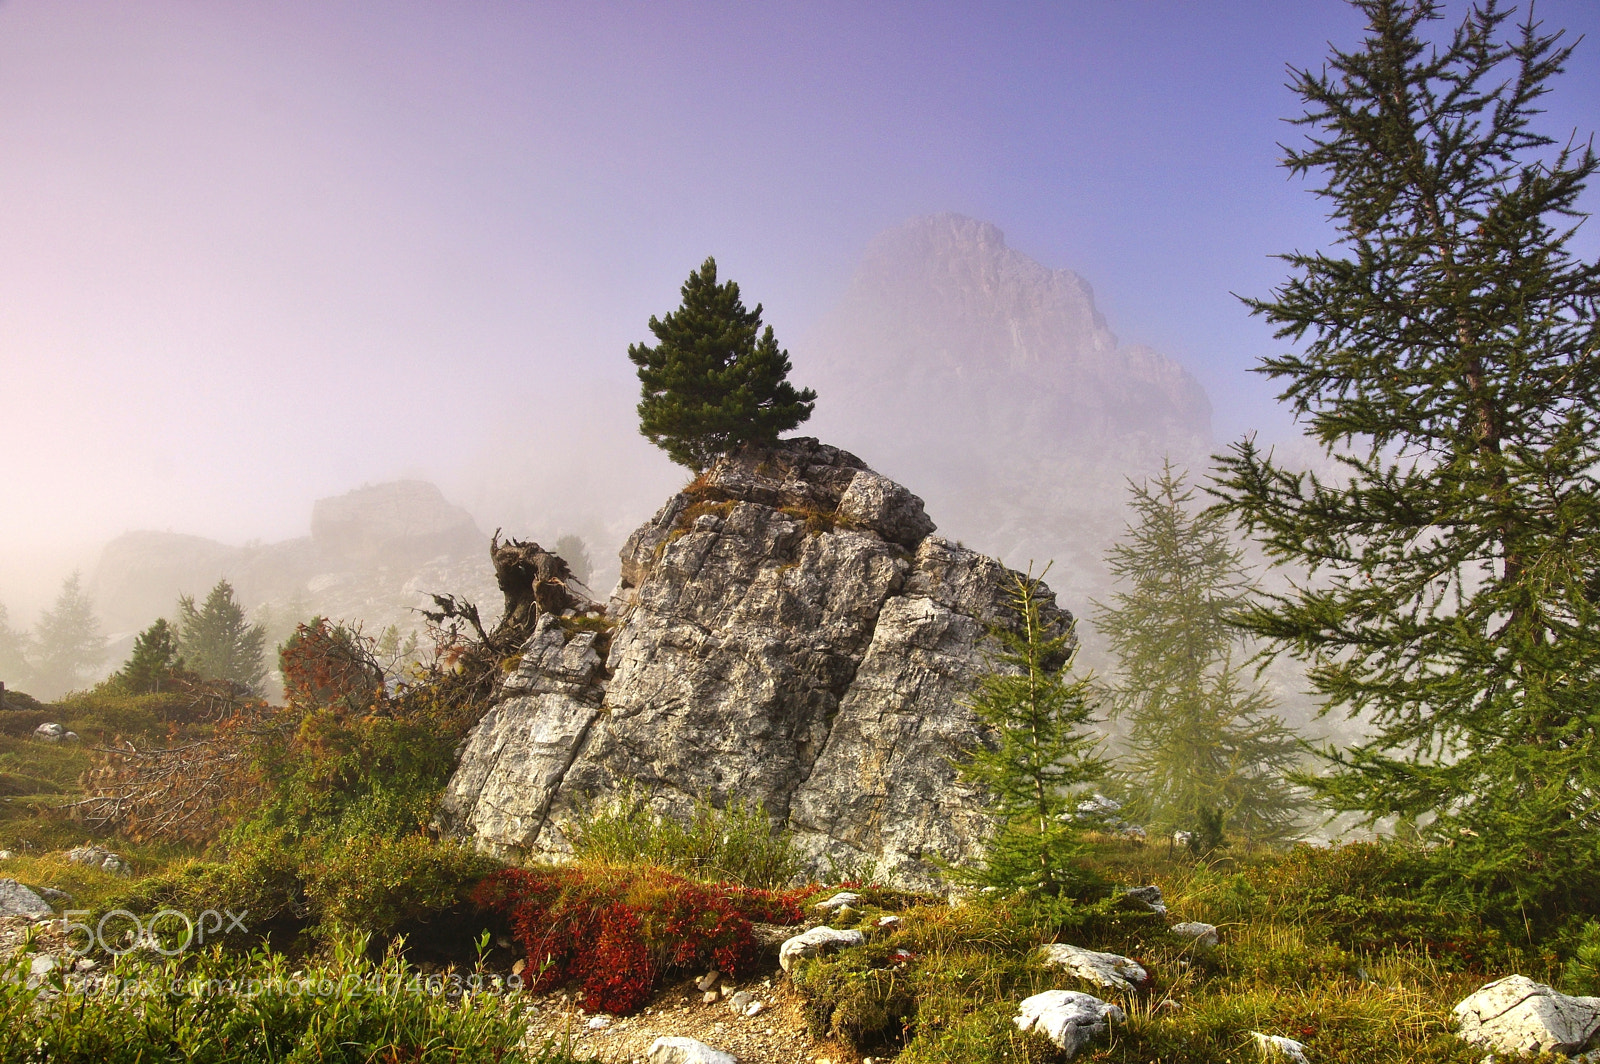 Sony SLT-A77 sample photo. Autumn in the dolomites photography